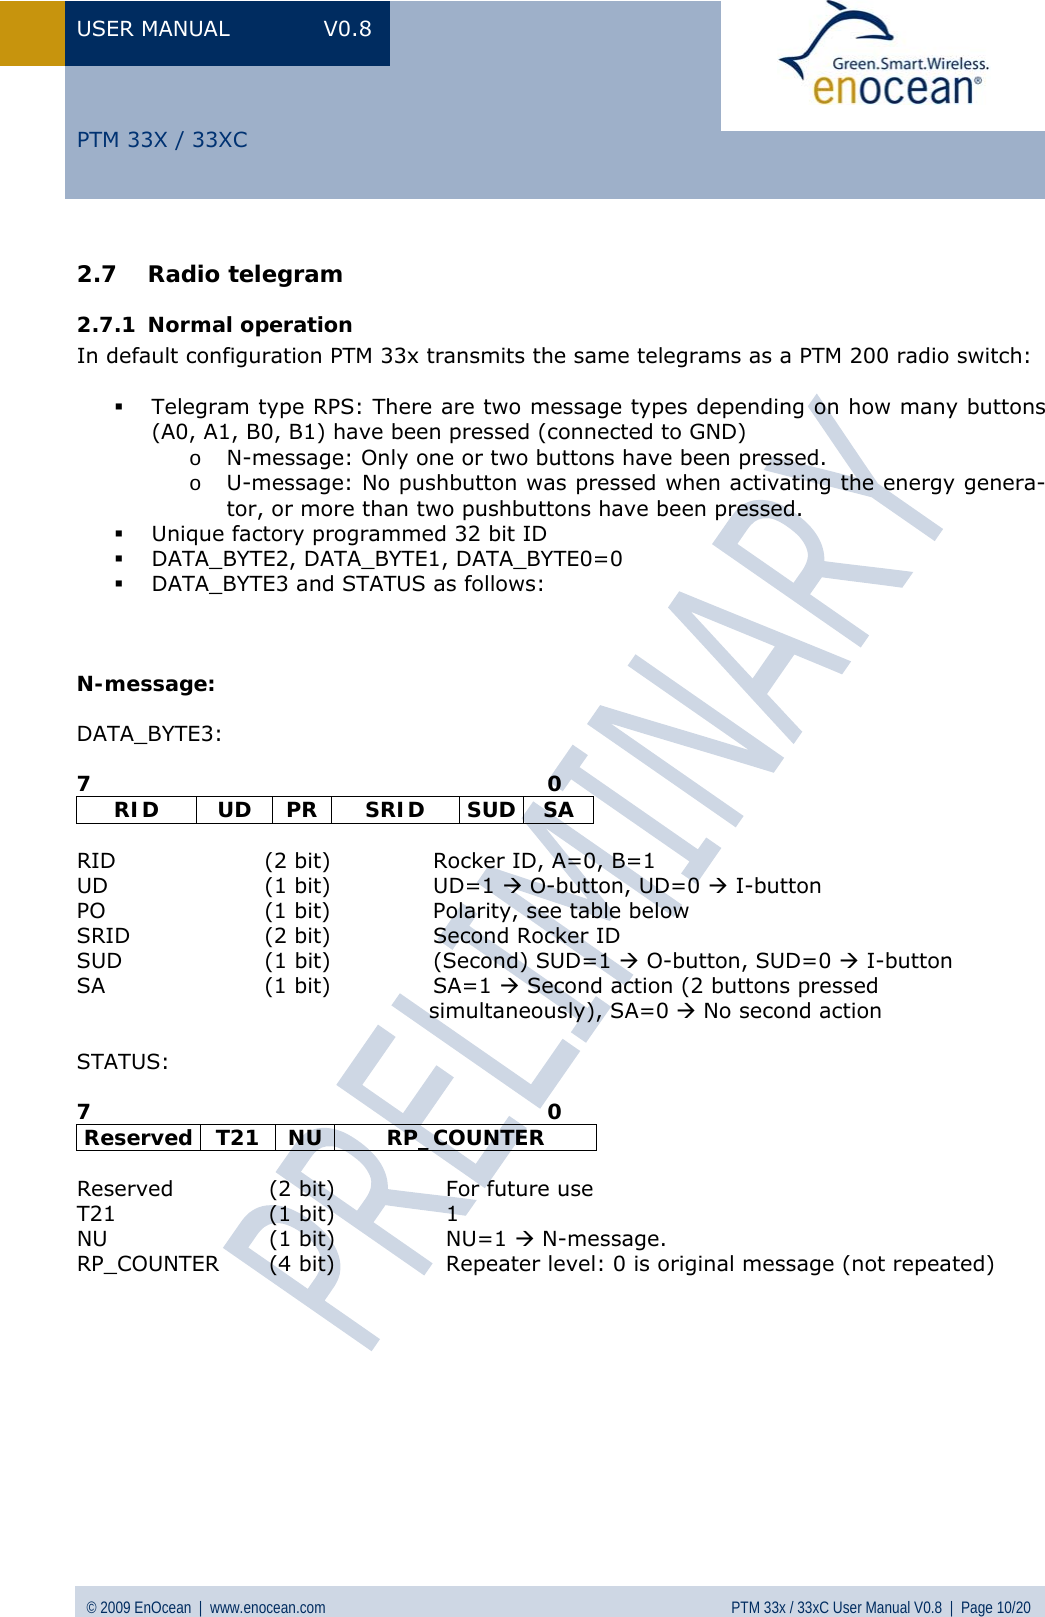 USER MANUAL V0.8 © 2009 EnOcean  |  www.enocean.com  PTM 33x / 33xC User Manual V0.8  |  Page 10/20   PTM 33X / 33XC 2.7 Radio telegram 2.7.1 Normal operation In default configuration PTM 33x transmits the same telegrams as a PTM 200 radio switch:   Telegram type RPS: There are two message types depending on how many buttons (A0, A1, B0, B1) have been pressed (connected to GND) o N-message: Only one or two buttons have been pressed. o U-message: No pushbutton was pressed when activating the energy genera-tor, or more than two pushbuttons have been pressed.  Unique factory programmed 32 bit ID  DATA_BYTE2, DATA_BYTE1, DATA_BYTE0=0  DATA_BYTE3 and STATUS as follows:    N-message:  DATA_BYTE3:  7                                                                0 RID UD PR SRID SUD SA  RID  (2 bit)  Rocker ID, A=0, B=1  UD (1 bit) UD=1 Æ O-button, UD=0 Æ I-button PO  (1 bit)  Polarity, see table below SRID  (2 bit)  Second Rocker ID SUD  (1 bit)  (Second) SUD=1 Æ O-button, SUD=0 Æ I-button SA (1 bit) SA=1 Æ Second action (2 buttons pressed                                                  simultaneously), SA=0 Æ No second action  STATUS:  7                                                                0 Reserved T21  NU  RP_COUNTER  Reserved  (2 bit)   For future use T21 (1 bit) 1 NU (1 bit) NU=1 Æ N-message. RP_COUNTER  (4 bit)  Repeater level: 0 is original message (not repeated)           